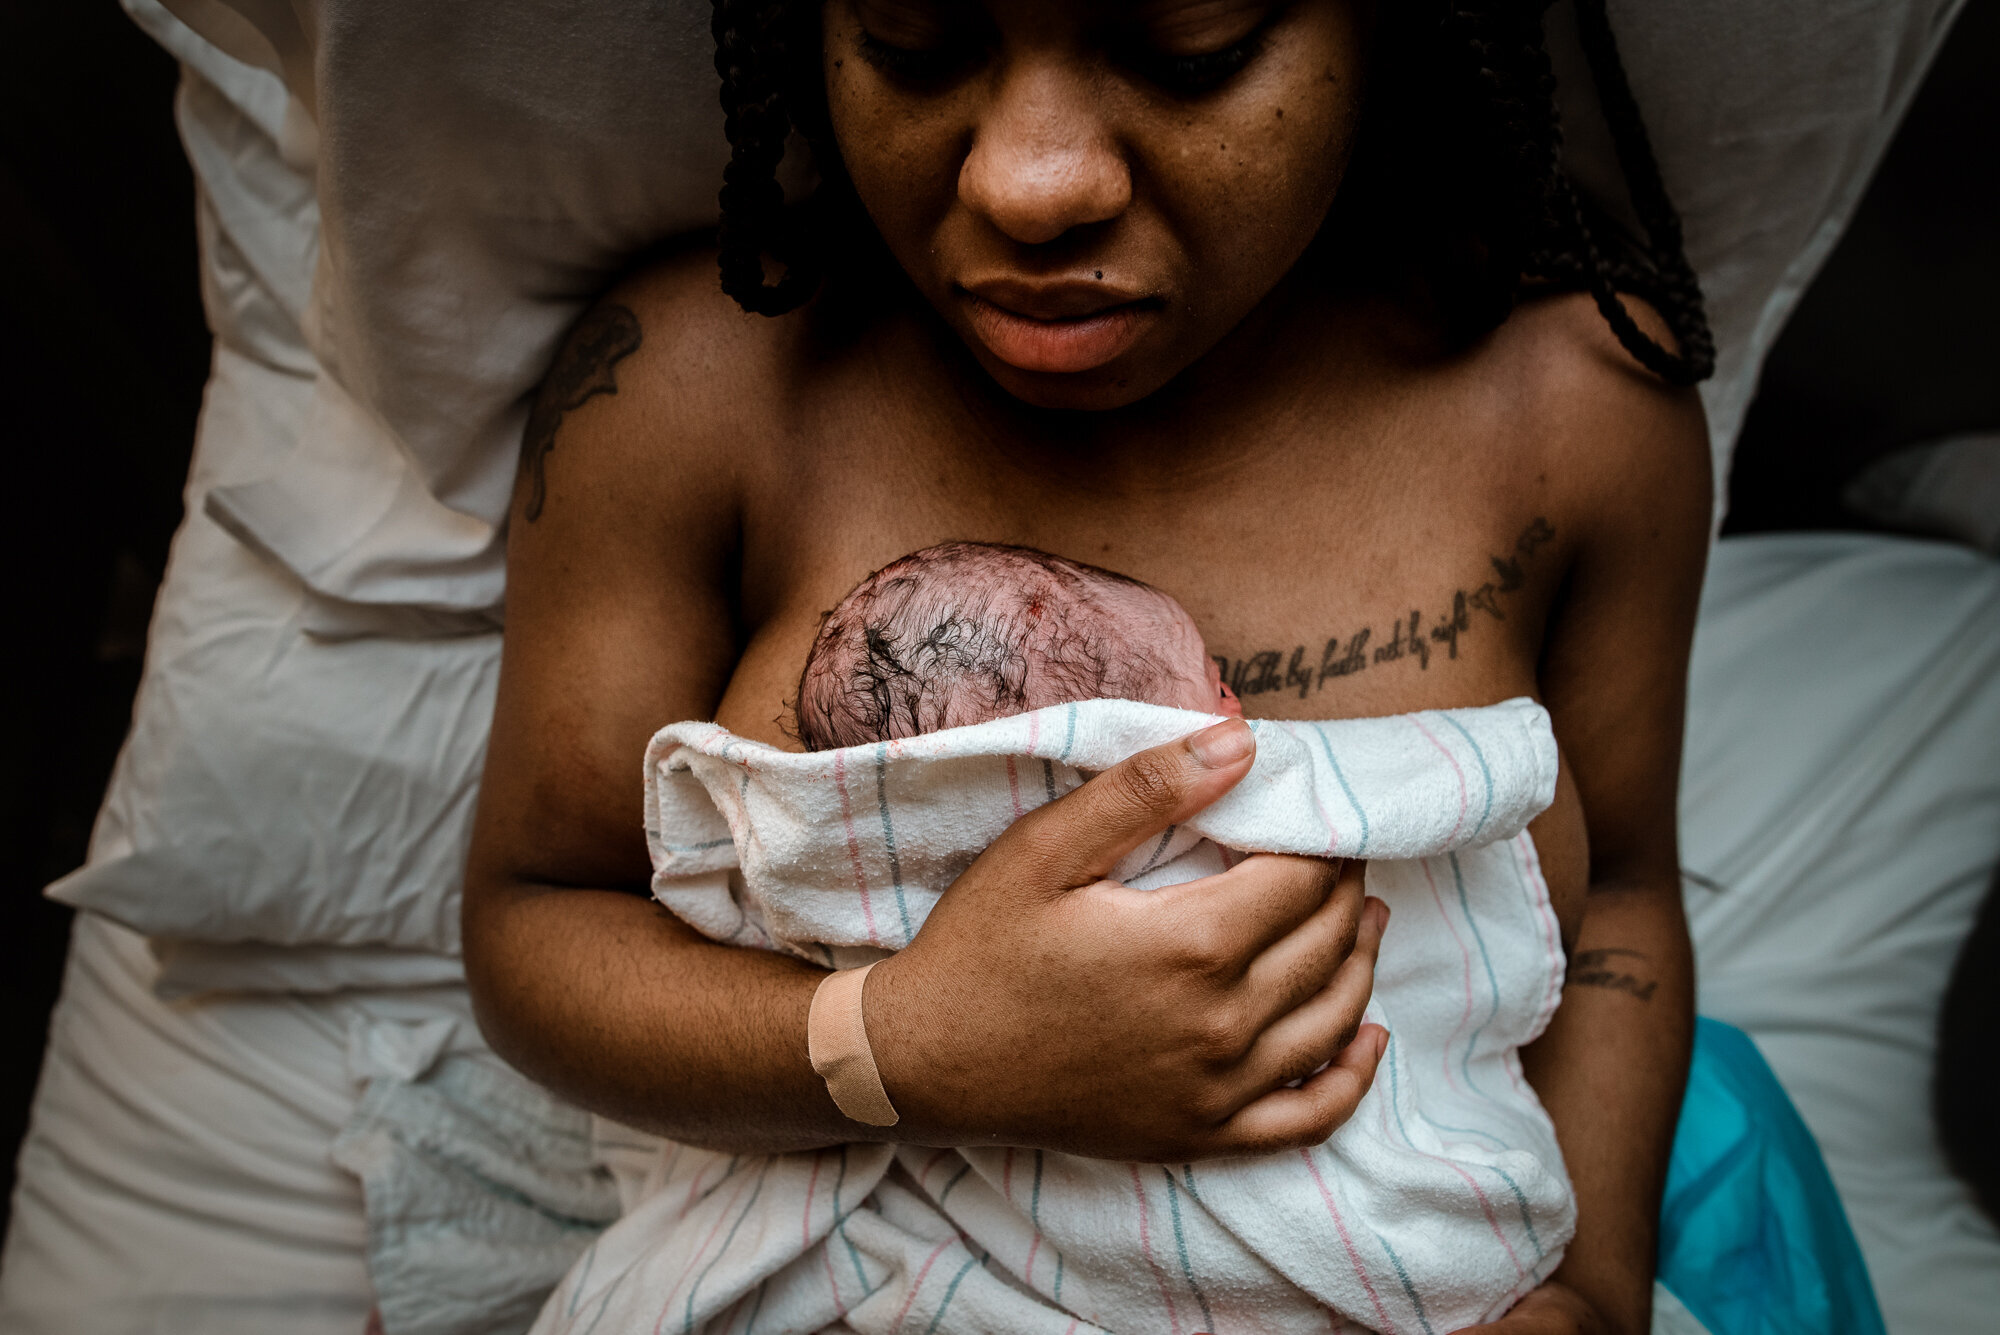 Gather+Birth+Cooperative-+Photography+and+Doula+Support+-August+14,+2019-014327.jpg